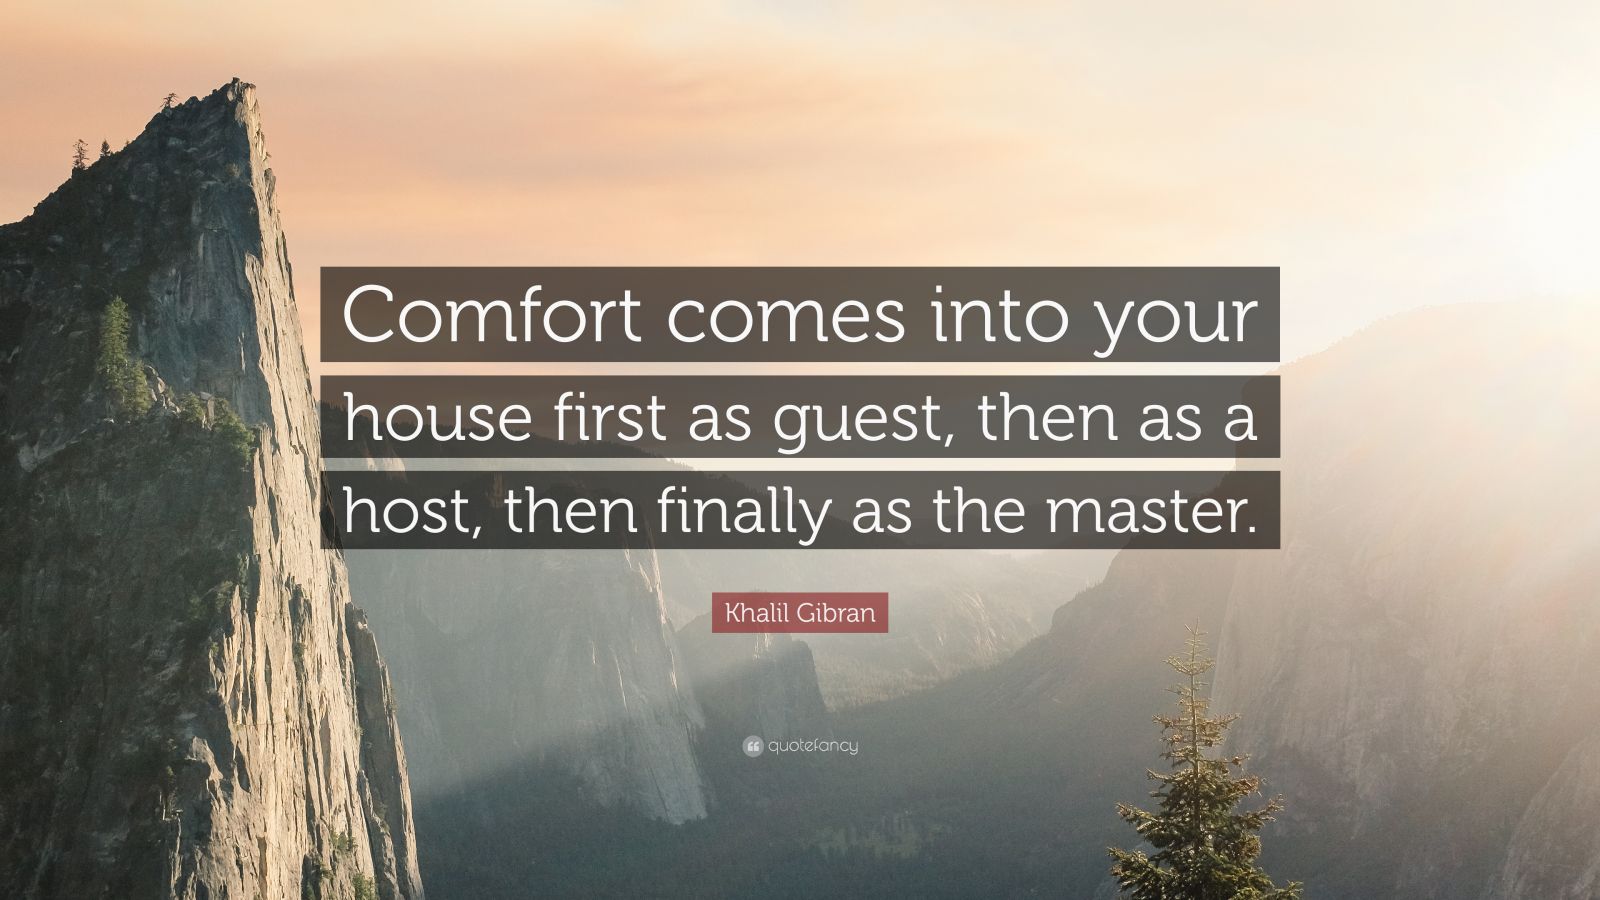 Khalil Gibran Quote: “Comfort comes into your house first as guest ...